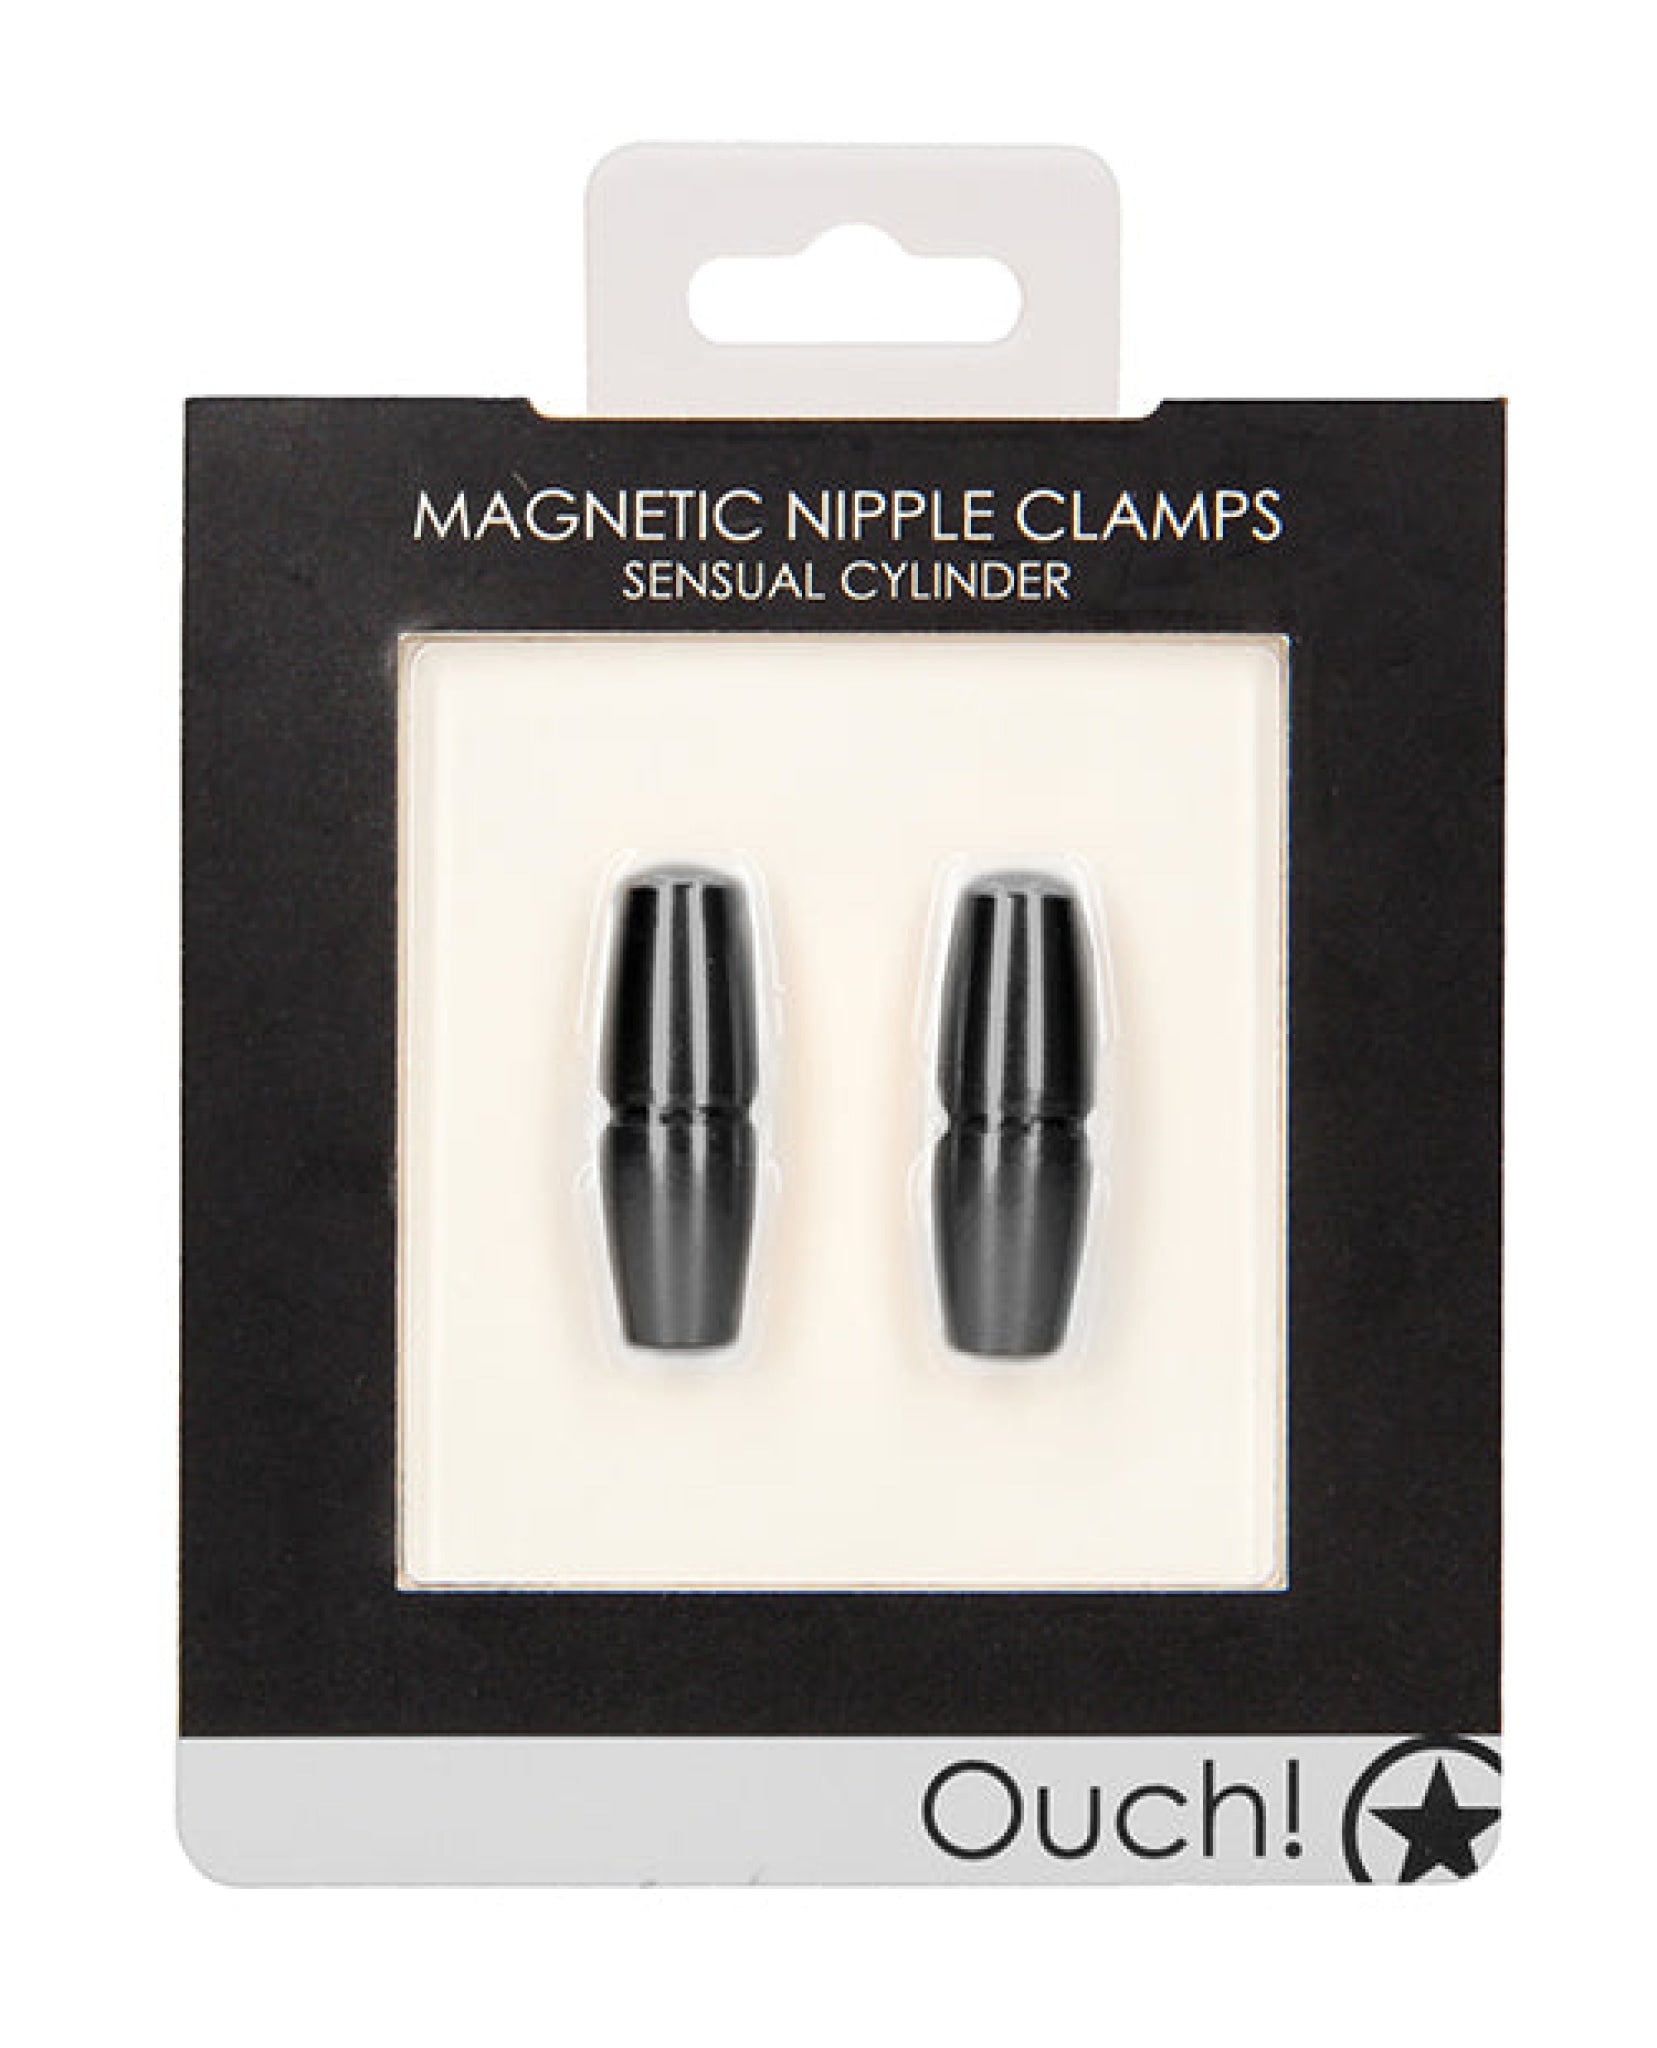 Shots Ouch Sensual Cylinder Magnetic Nipple Clamps Shots America LLC